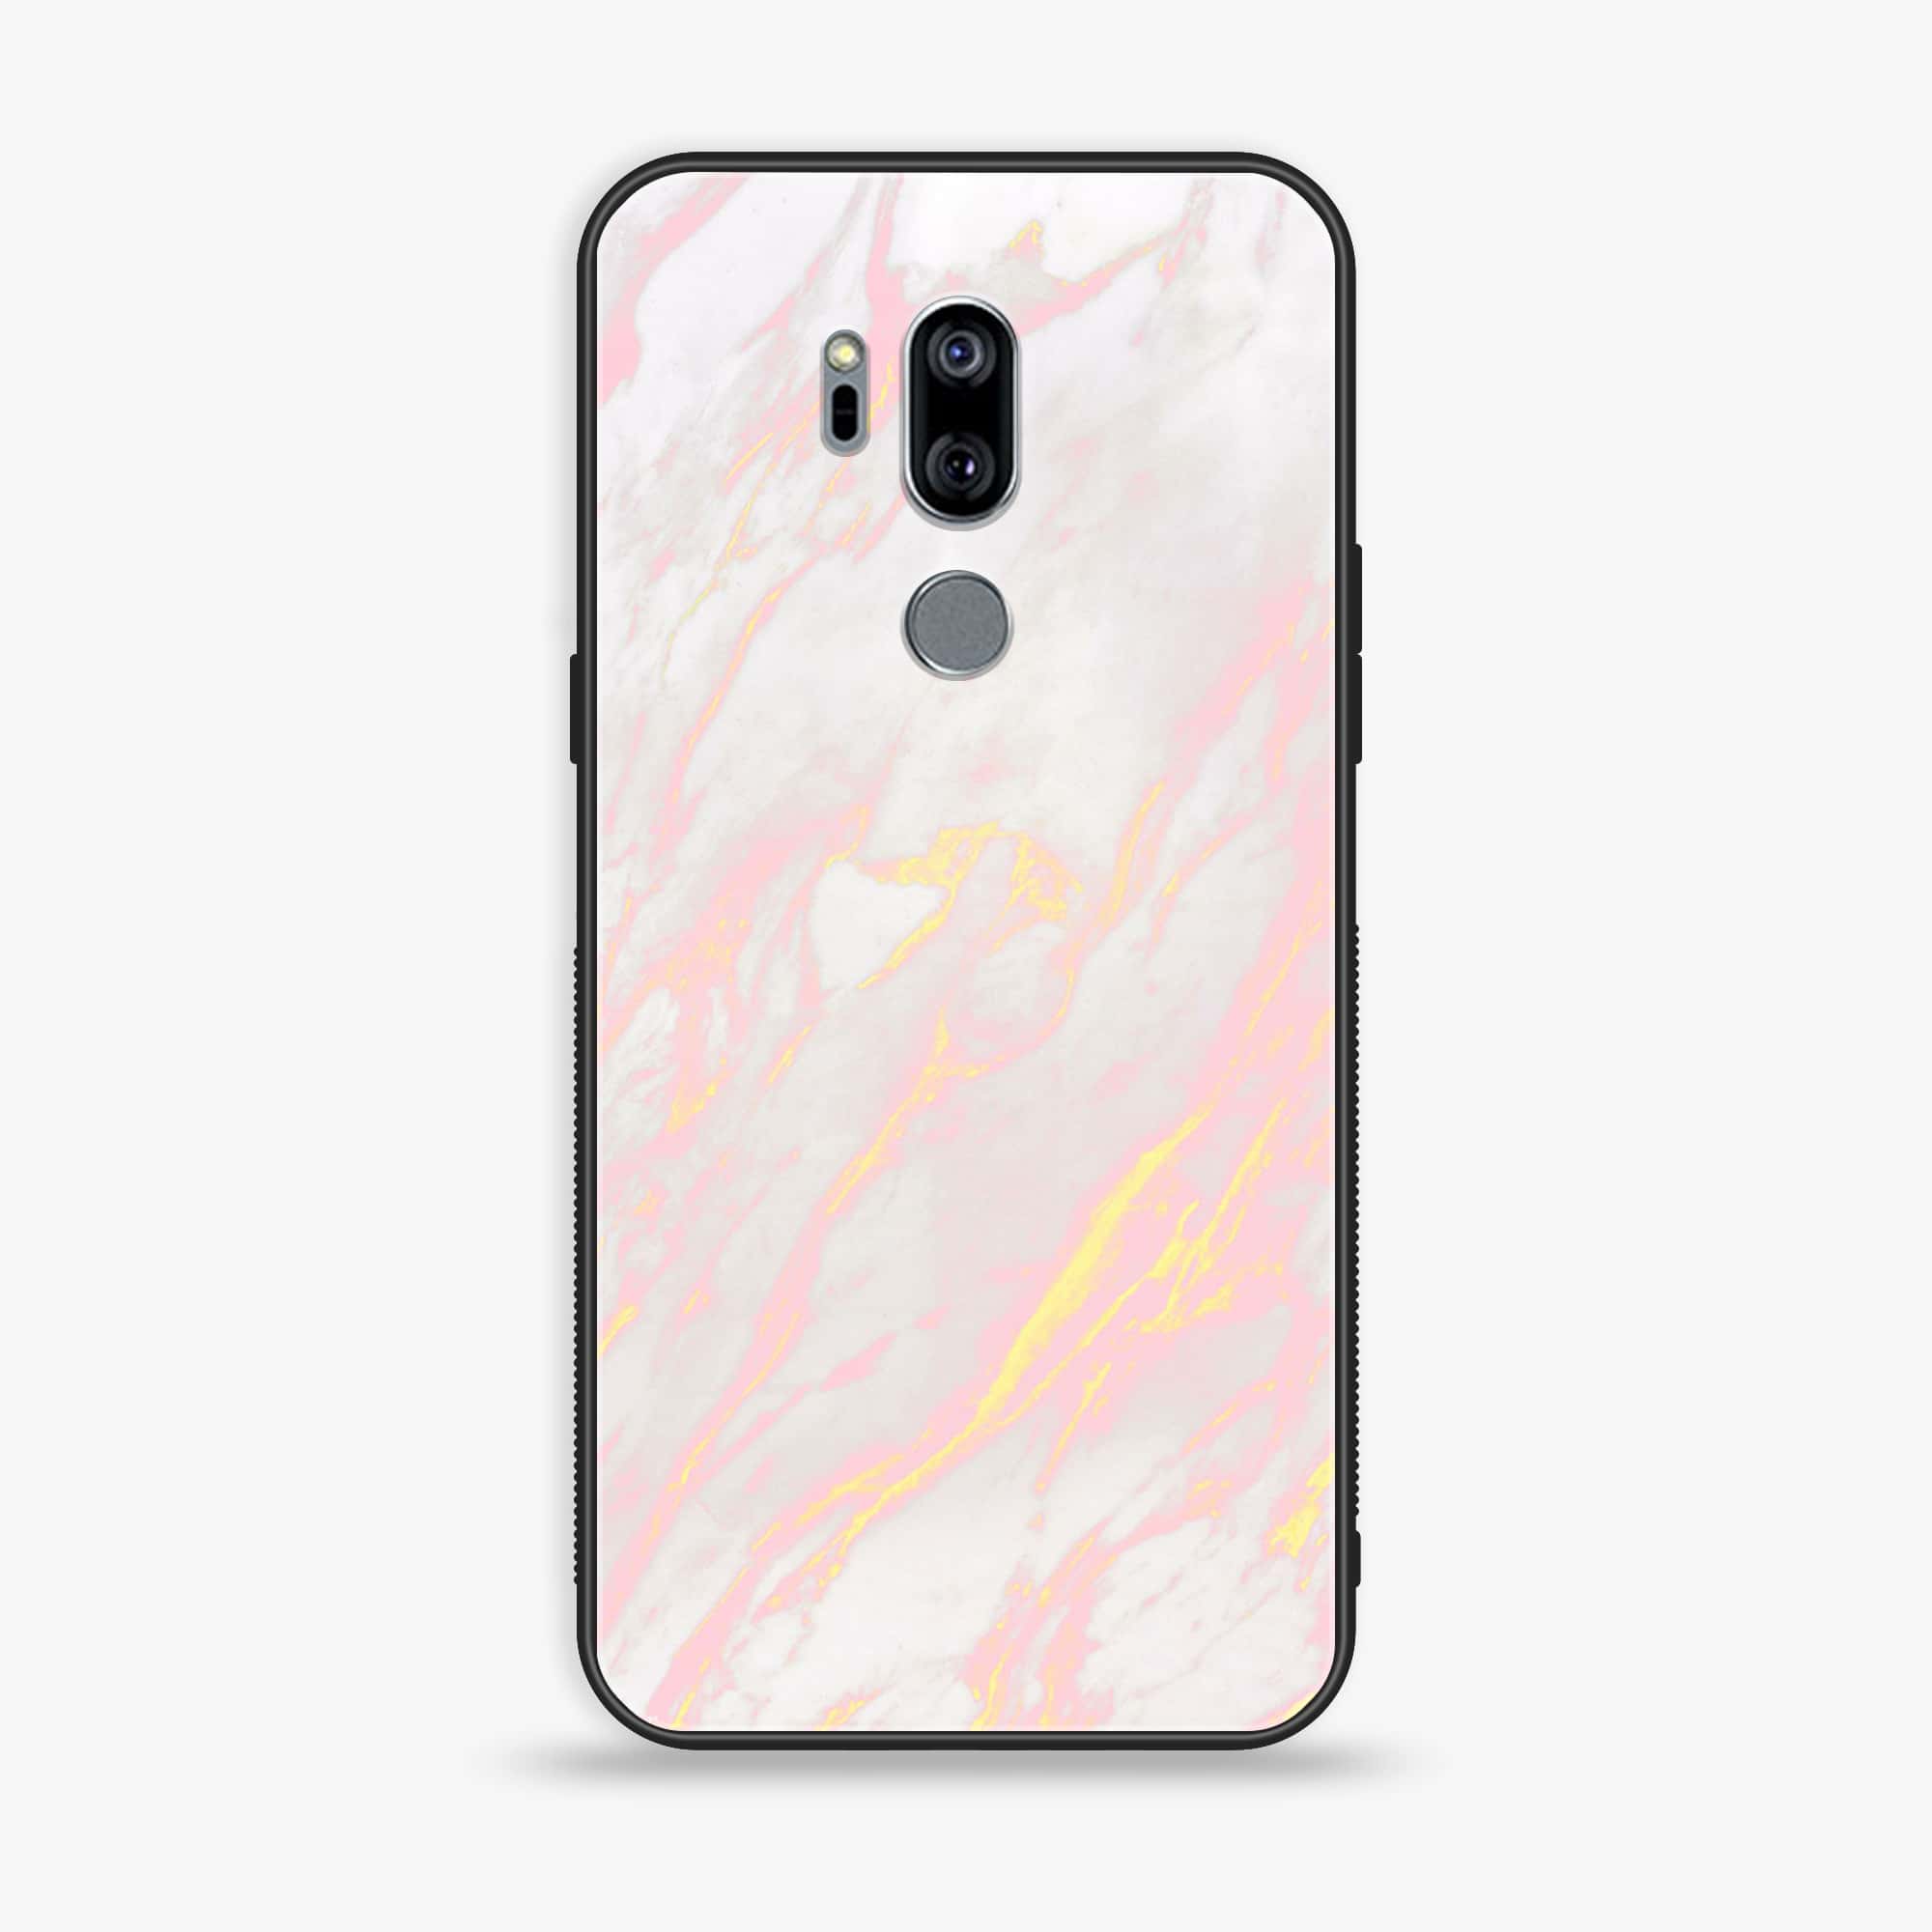 LG G7 ThinQ - Pink Marble Series - Premium Printed Glass soft Bumper shock Proof Case